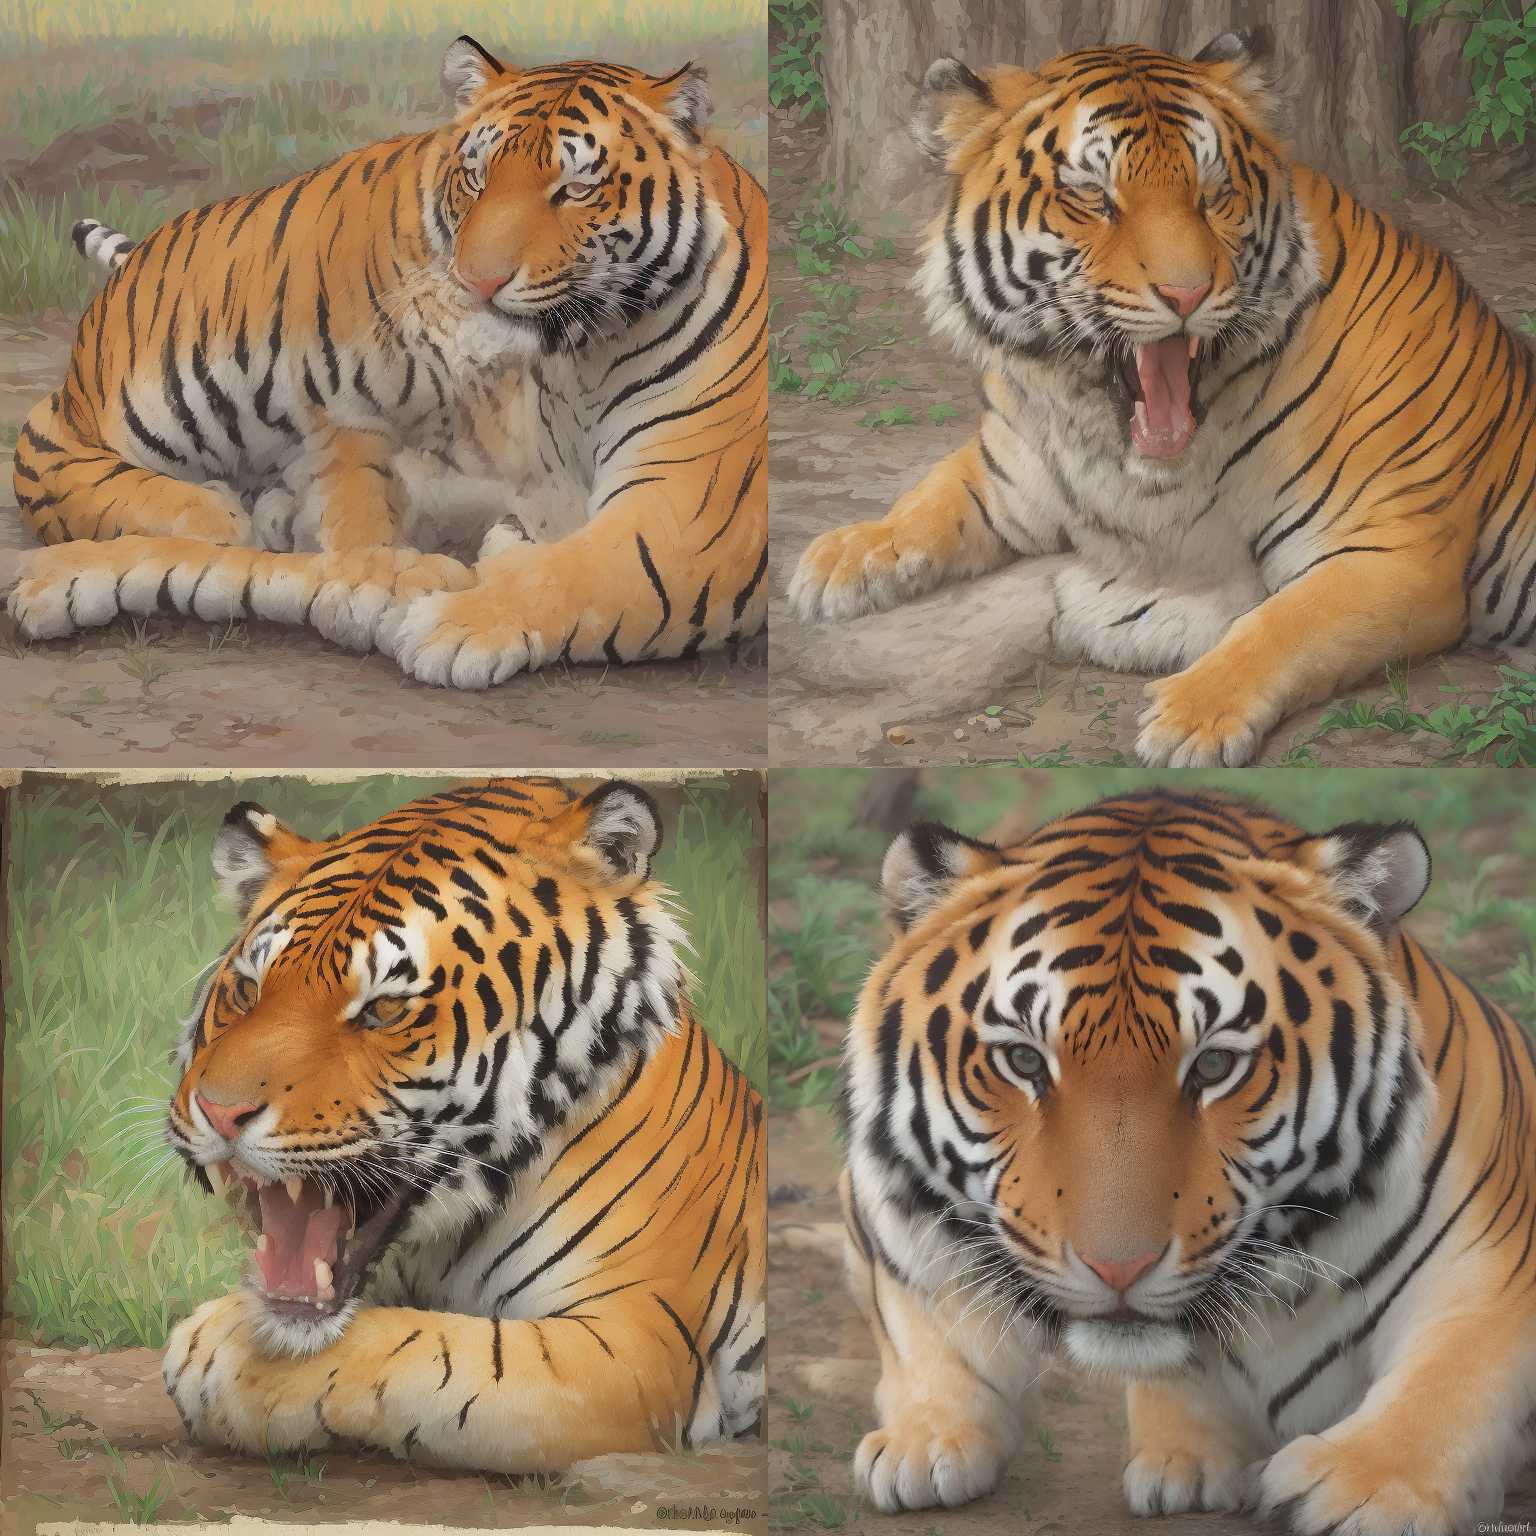 A tiger eating